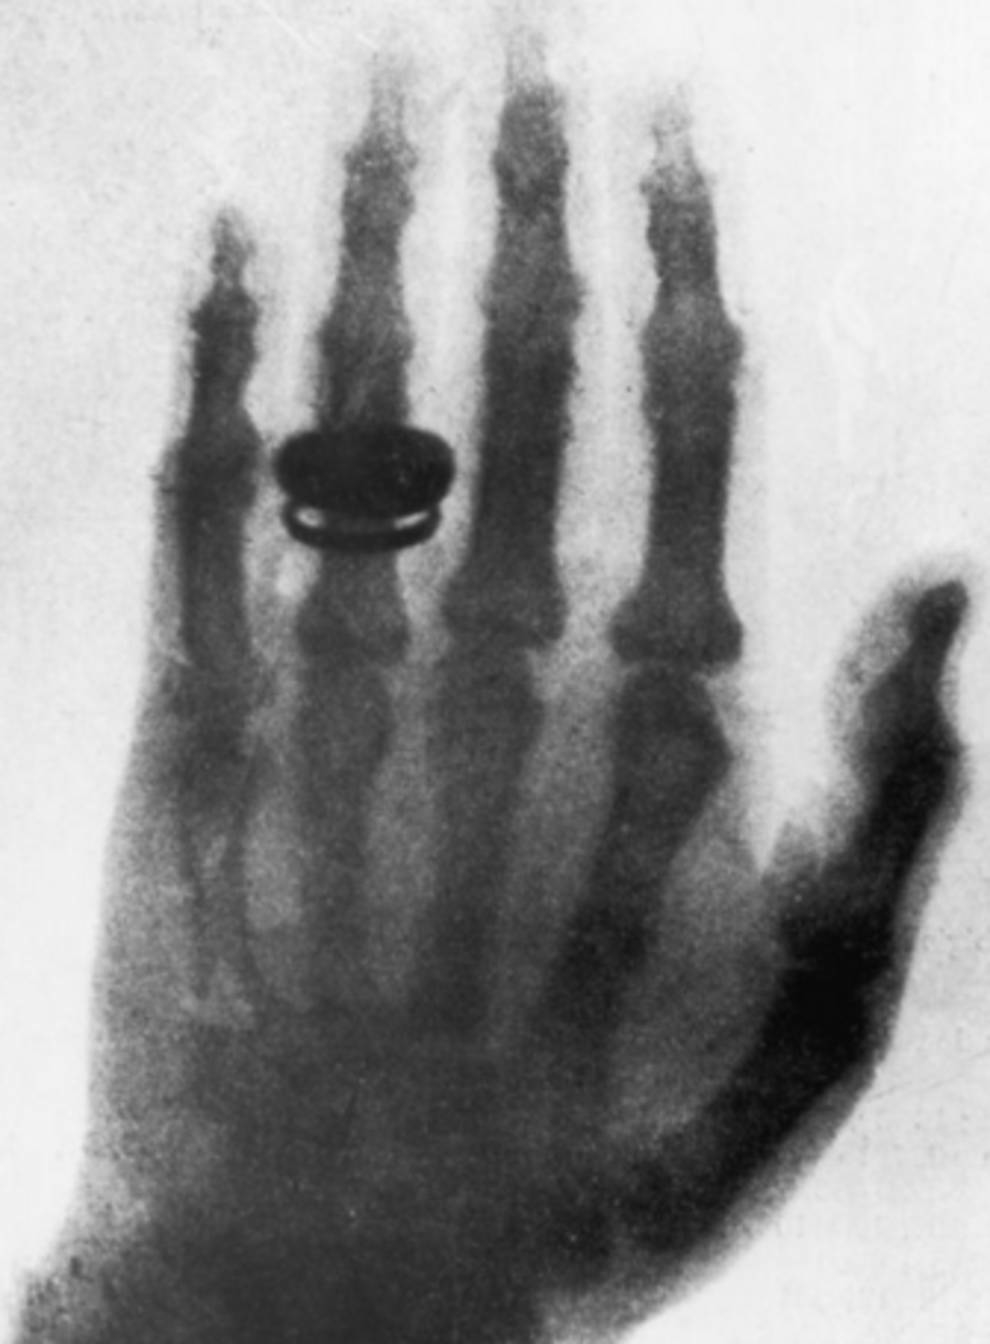 On the first X-ray was the hand of the scientist's wife